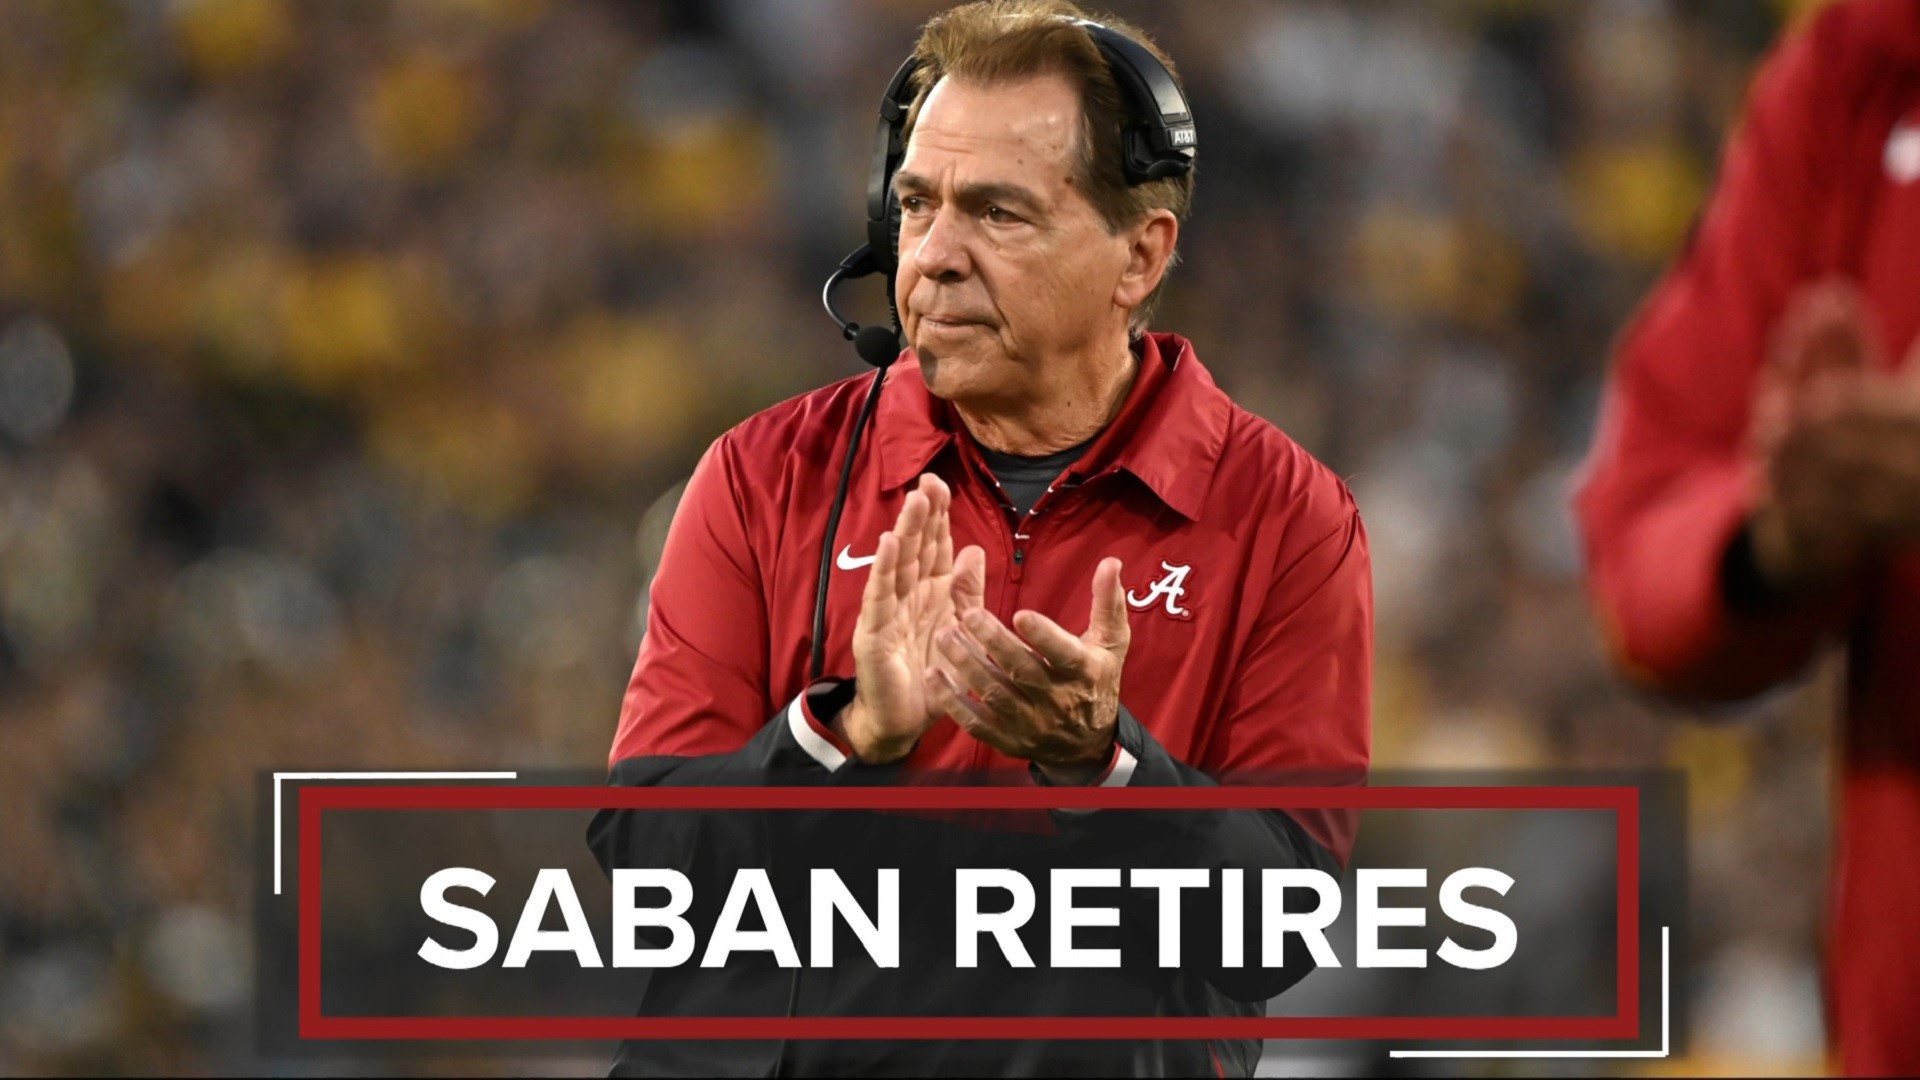 Alabama’s Nick Saban, who has won more college football national championships than any coach in the modern era, announced his retirement on Wednesday.